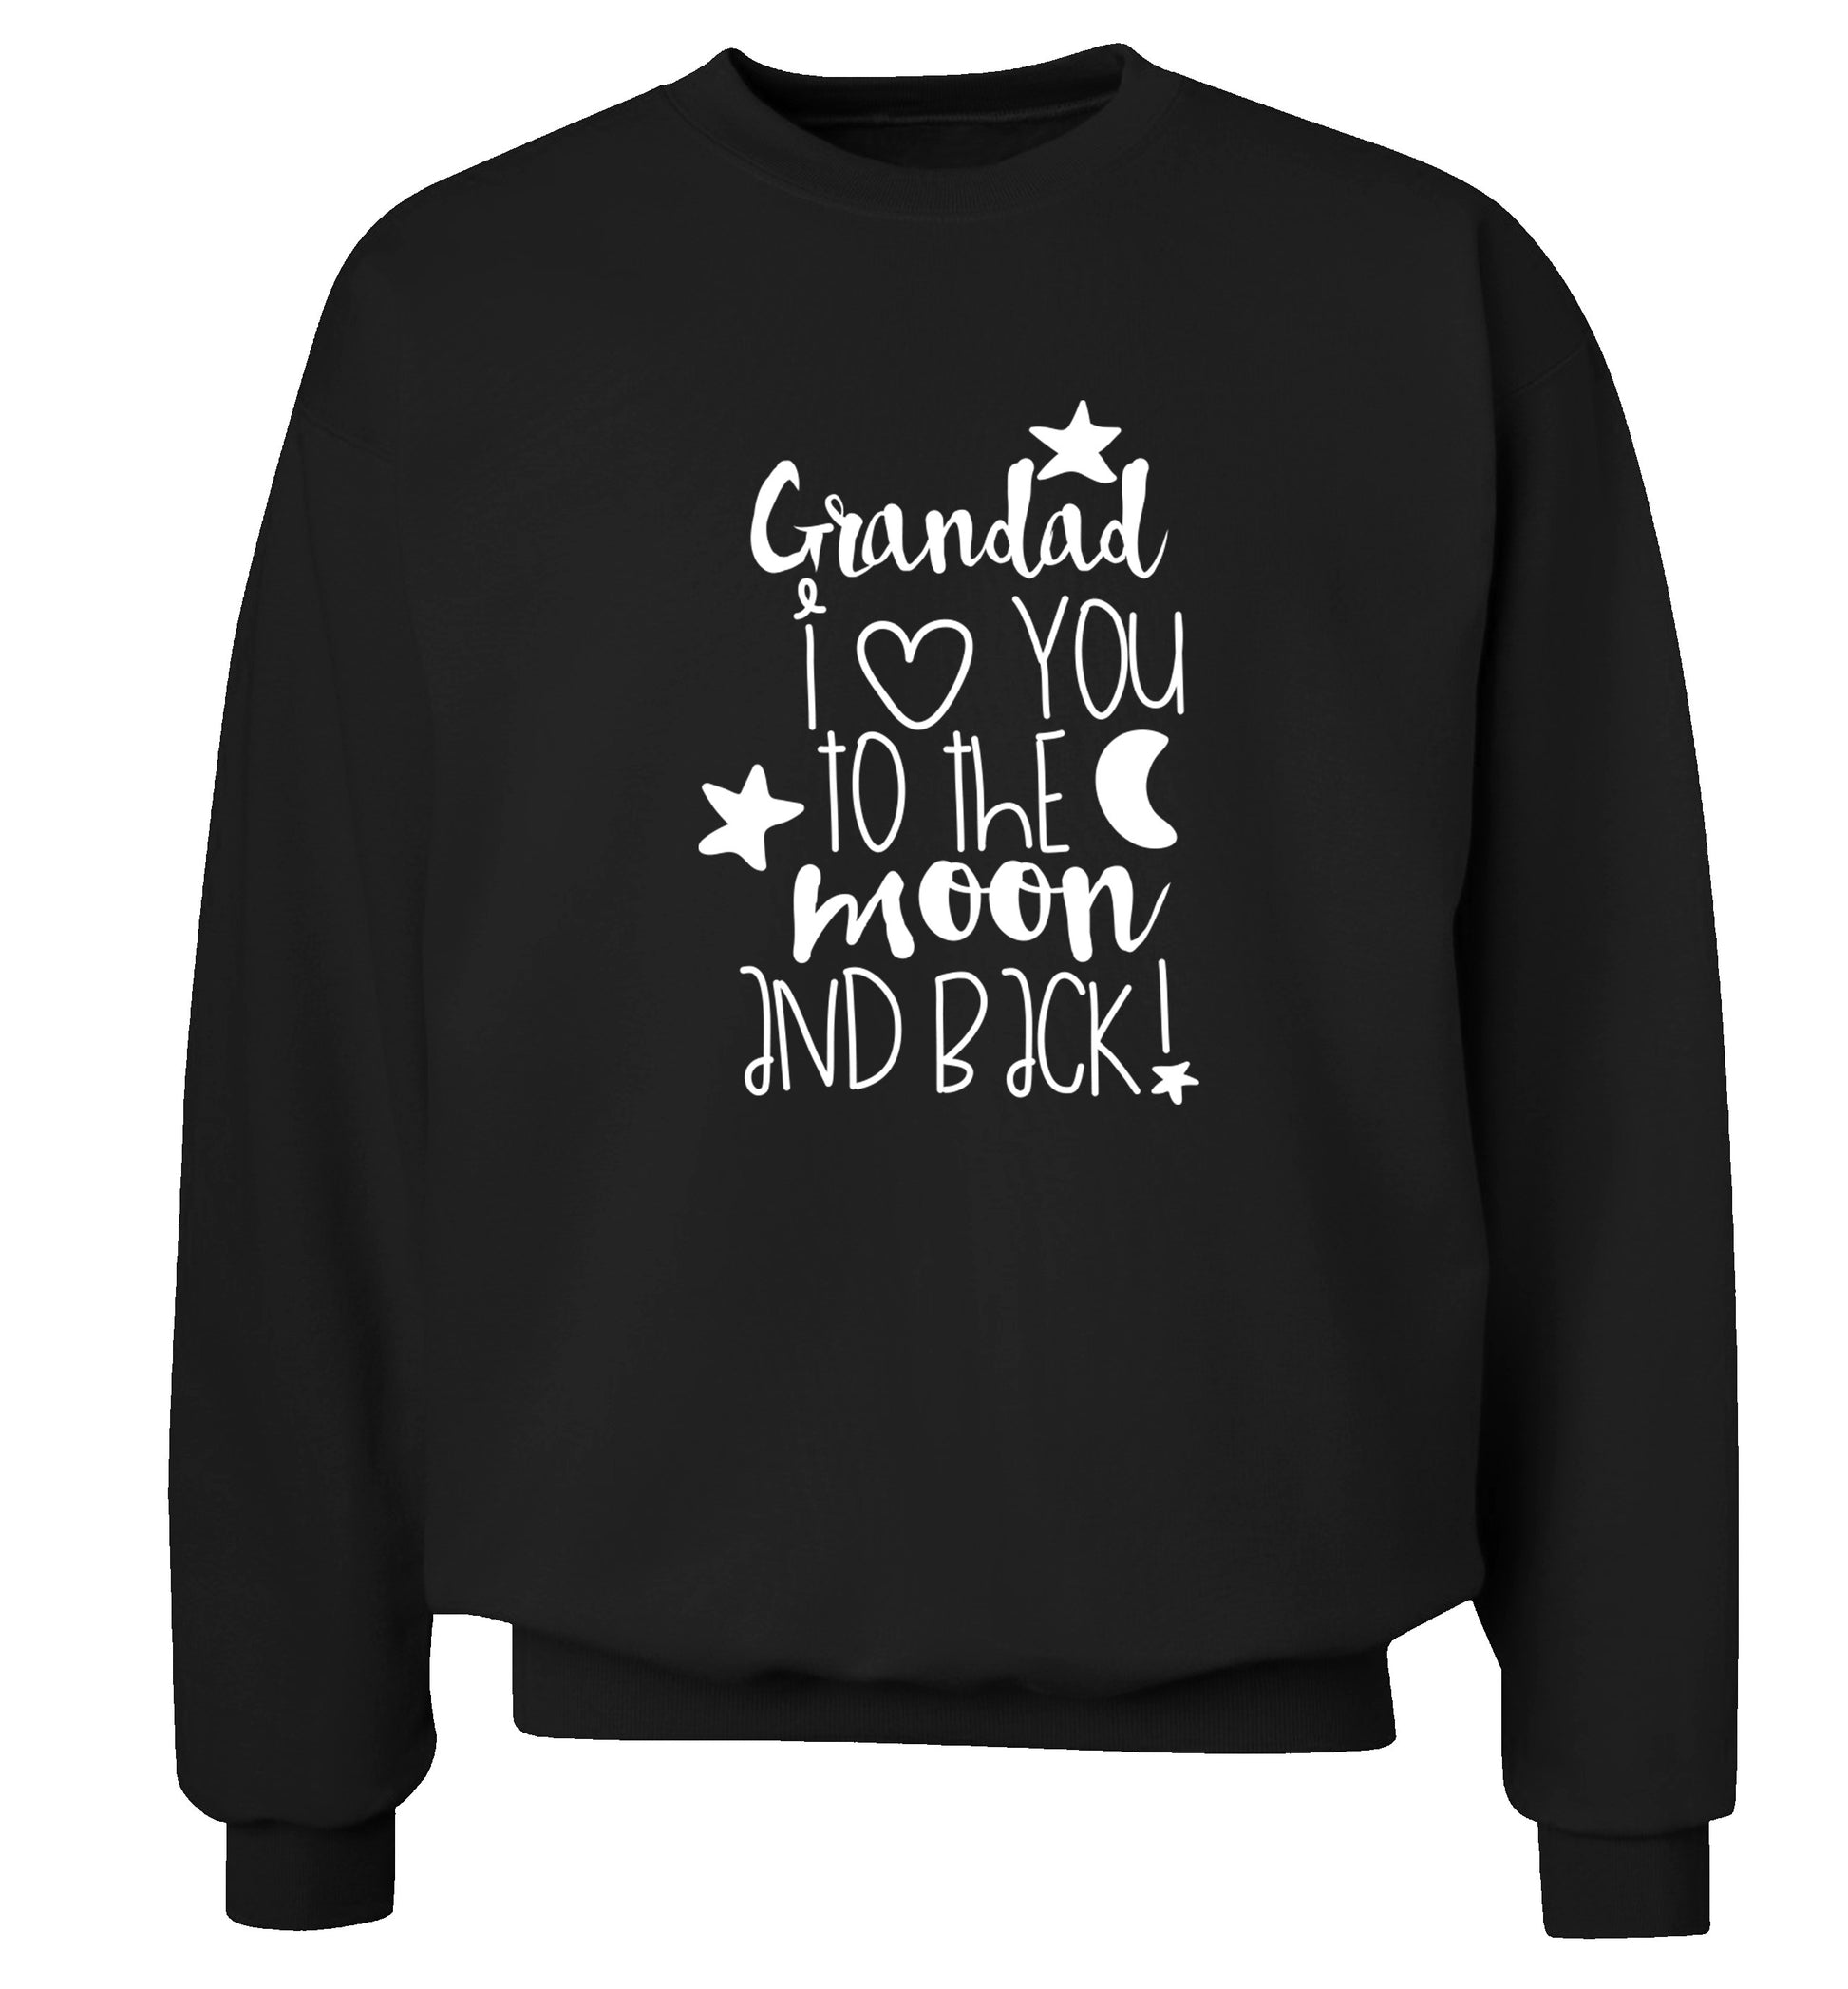 Grandad's I love you to the moon and back Adult's unisex black  sweater 2XL